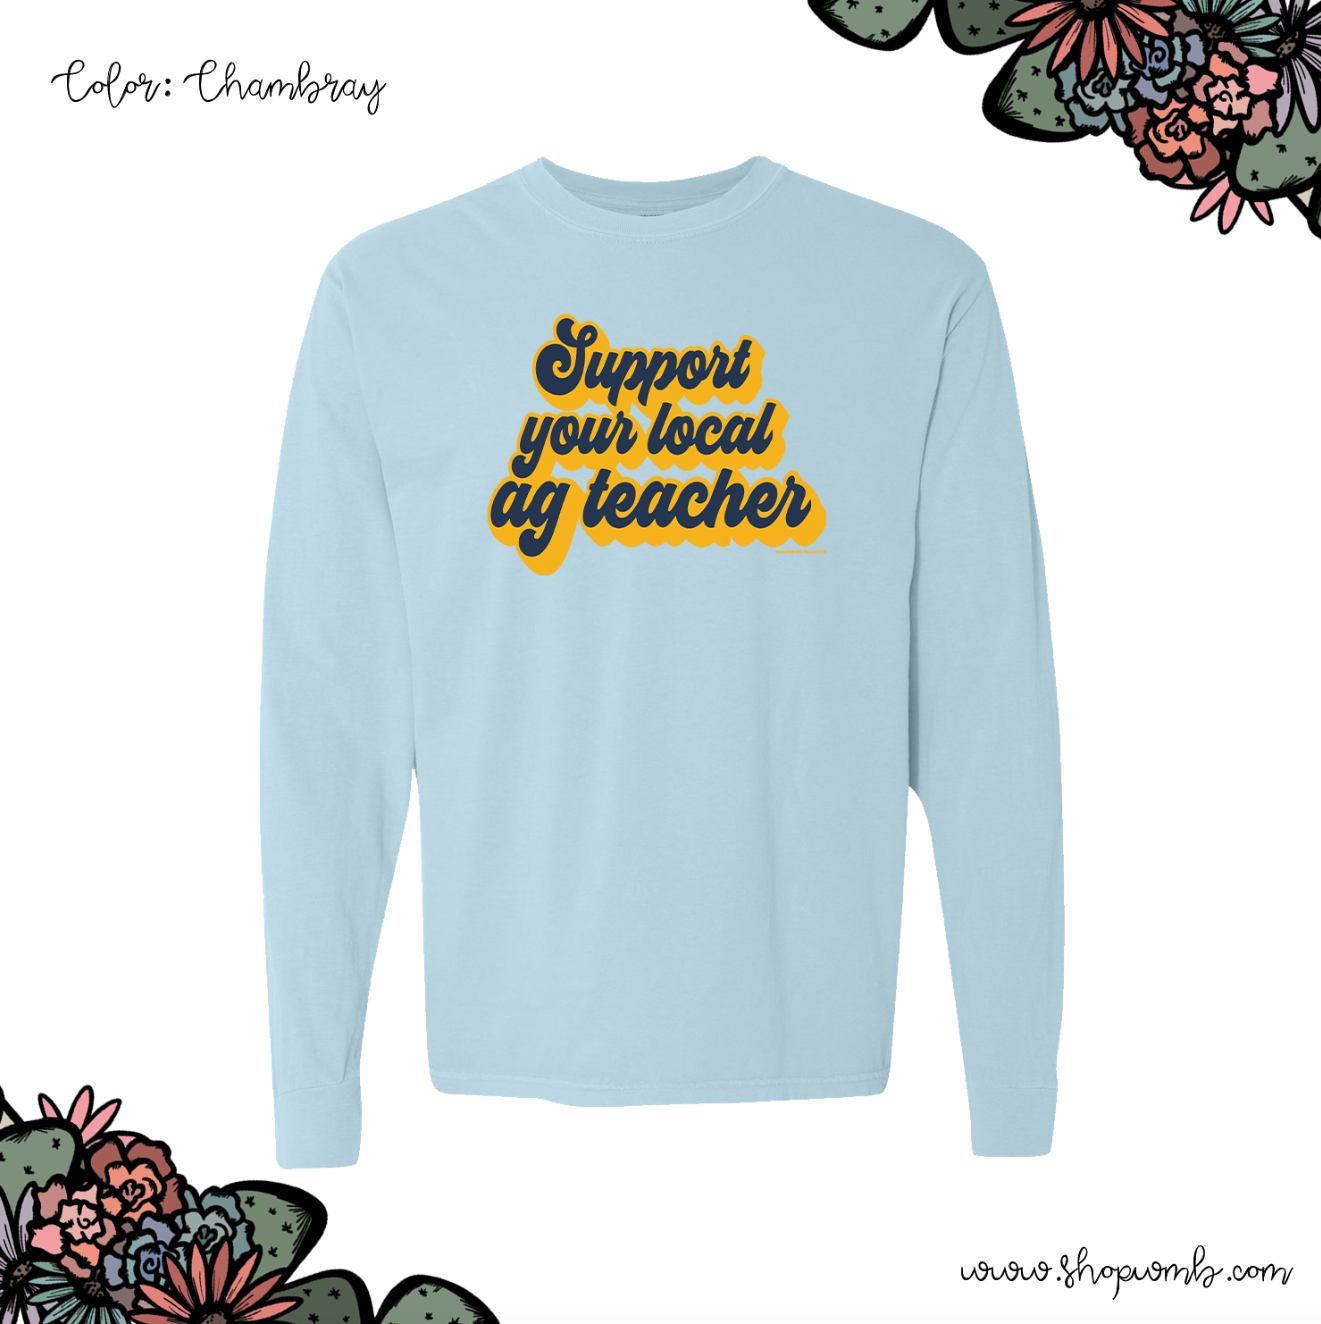 Retro Support Your Local Ag Teacher Navy Gold LONG SLEEVE T-Shirt (S-3XL) - Multiple Colors!